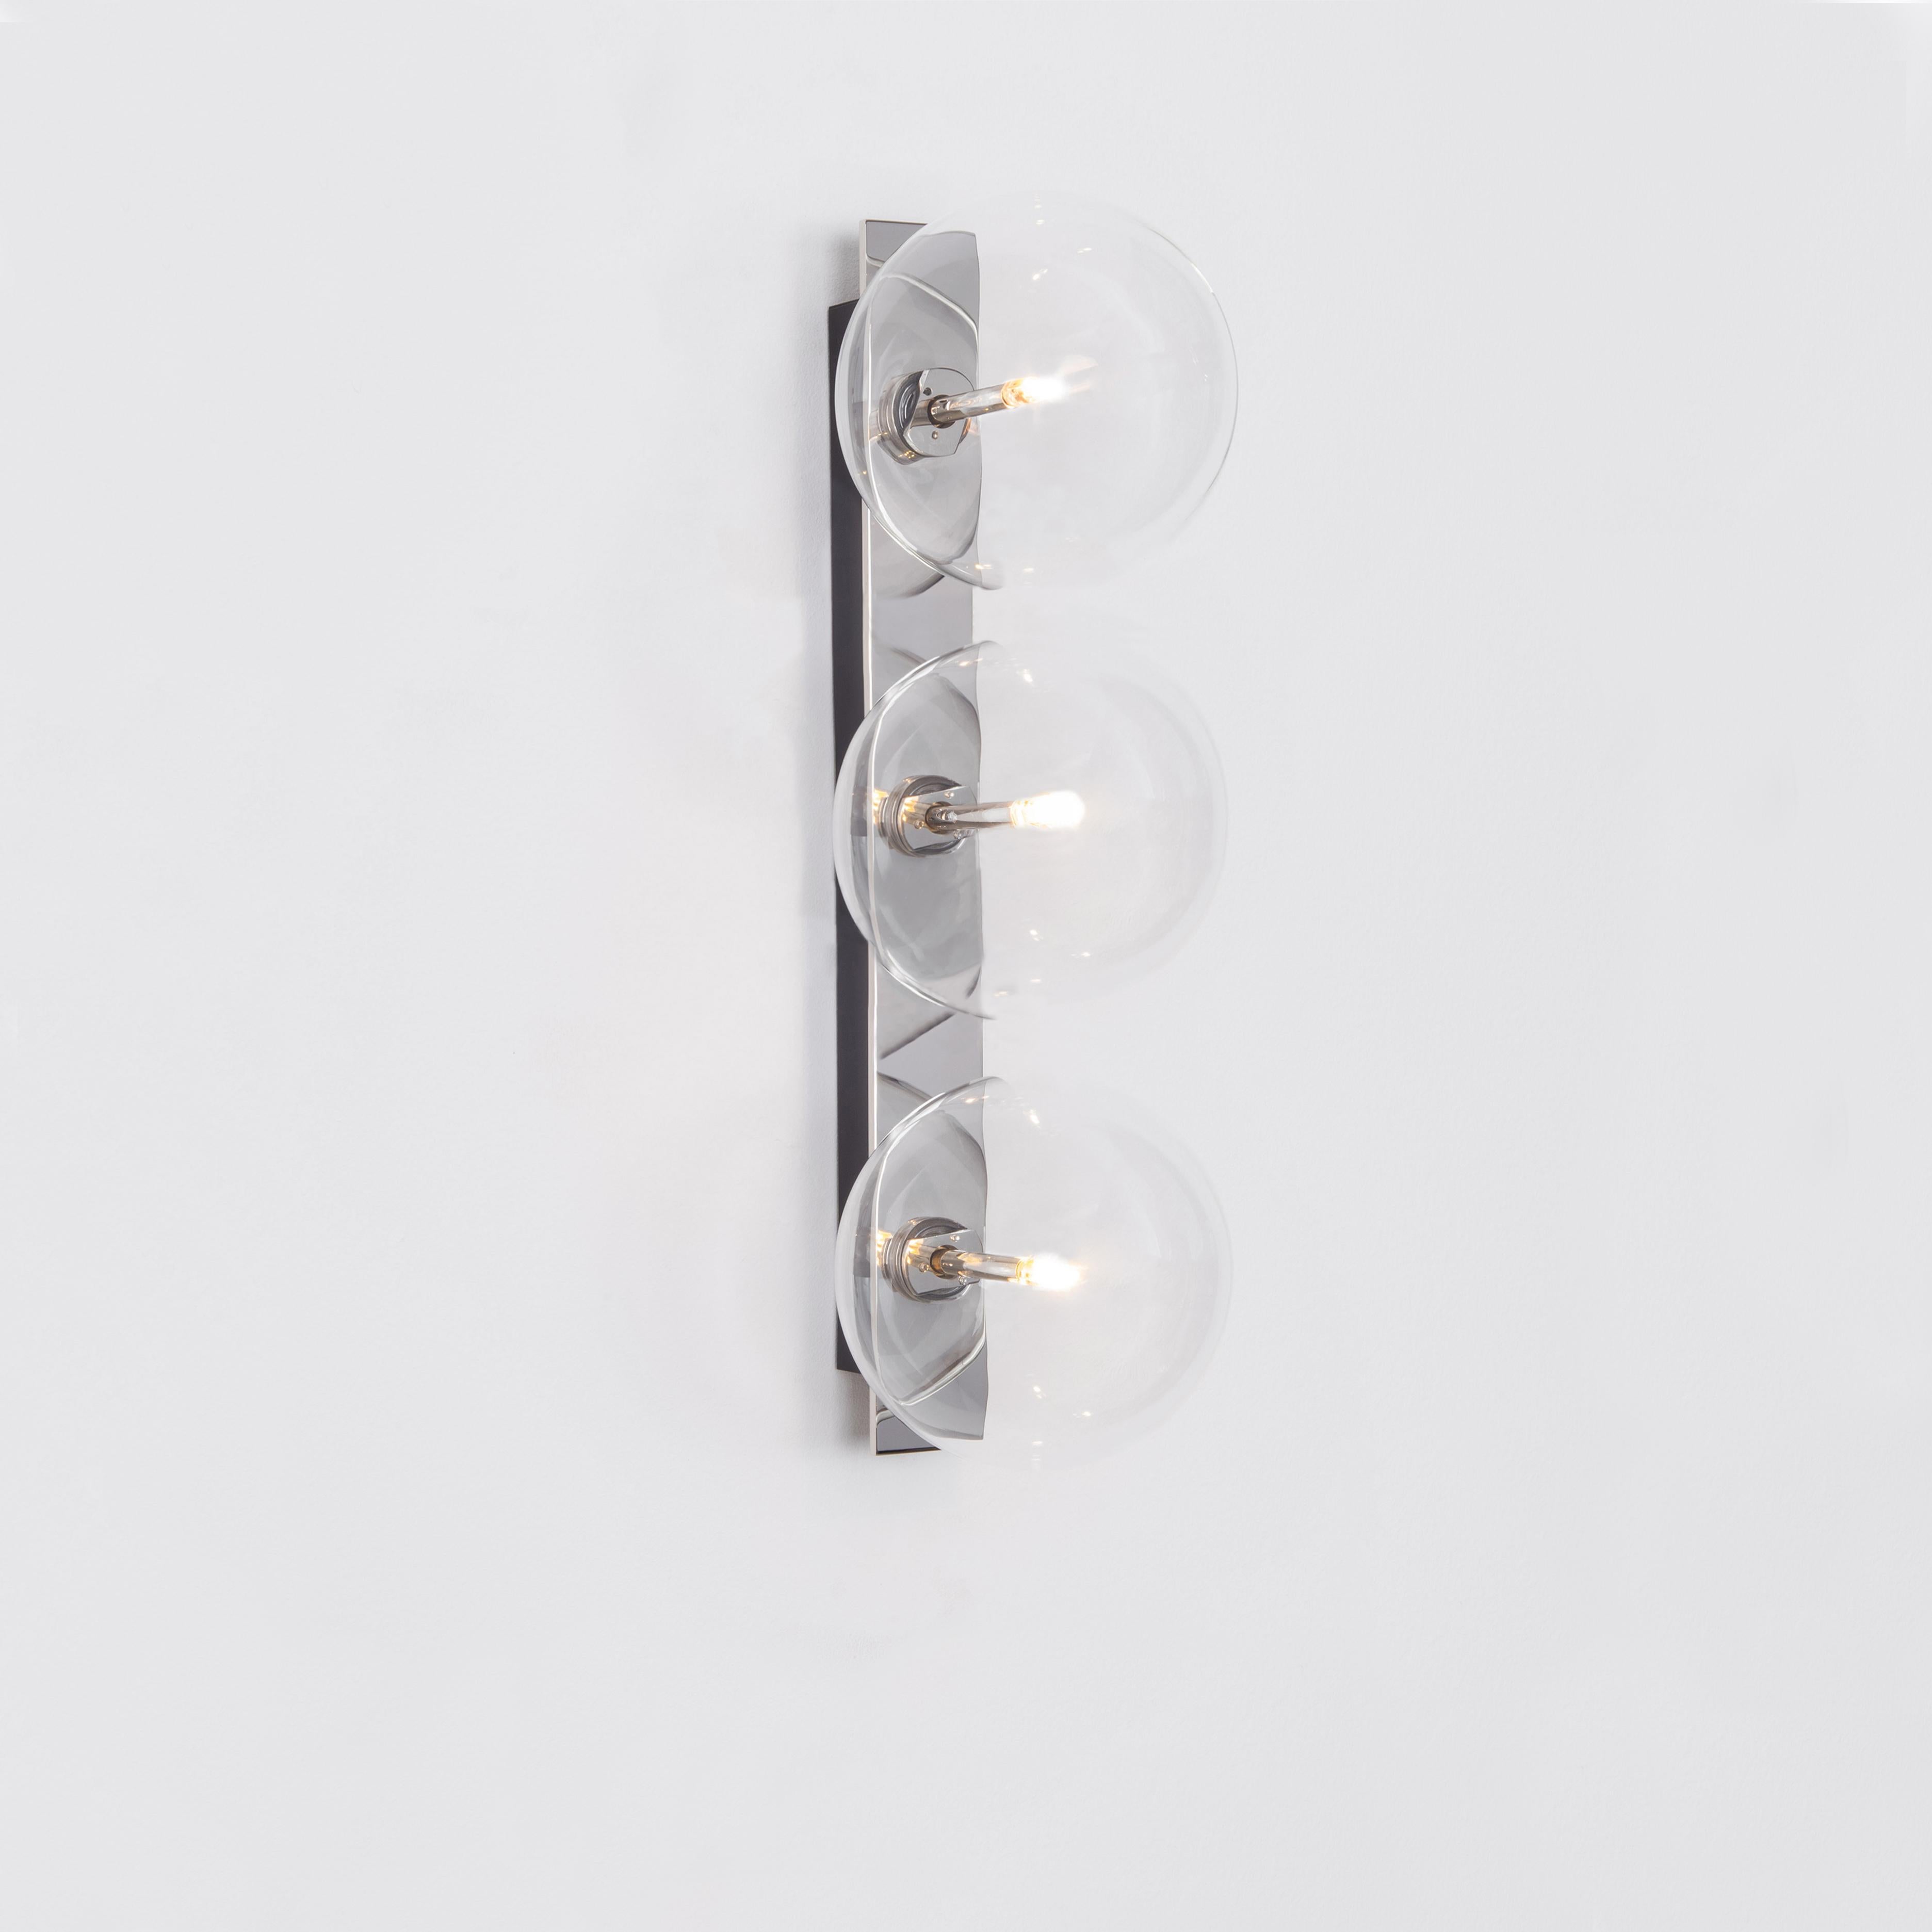 Oslo Triple Wall Sconce by Schwung
Dimensions: W 15 x D 19 x H 50 cm
Materials: Polished nickel, hand blown glass globes

Finishes available: Black gunmetal, polished nickel, brass


 Schwung is a german word, and loosely defined, means